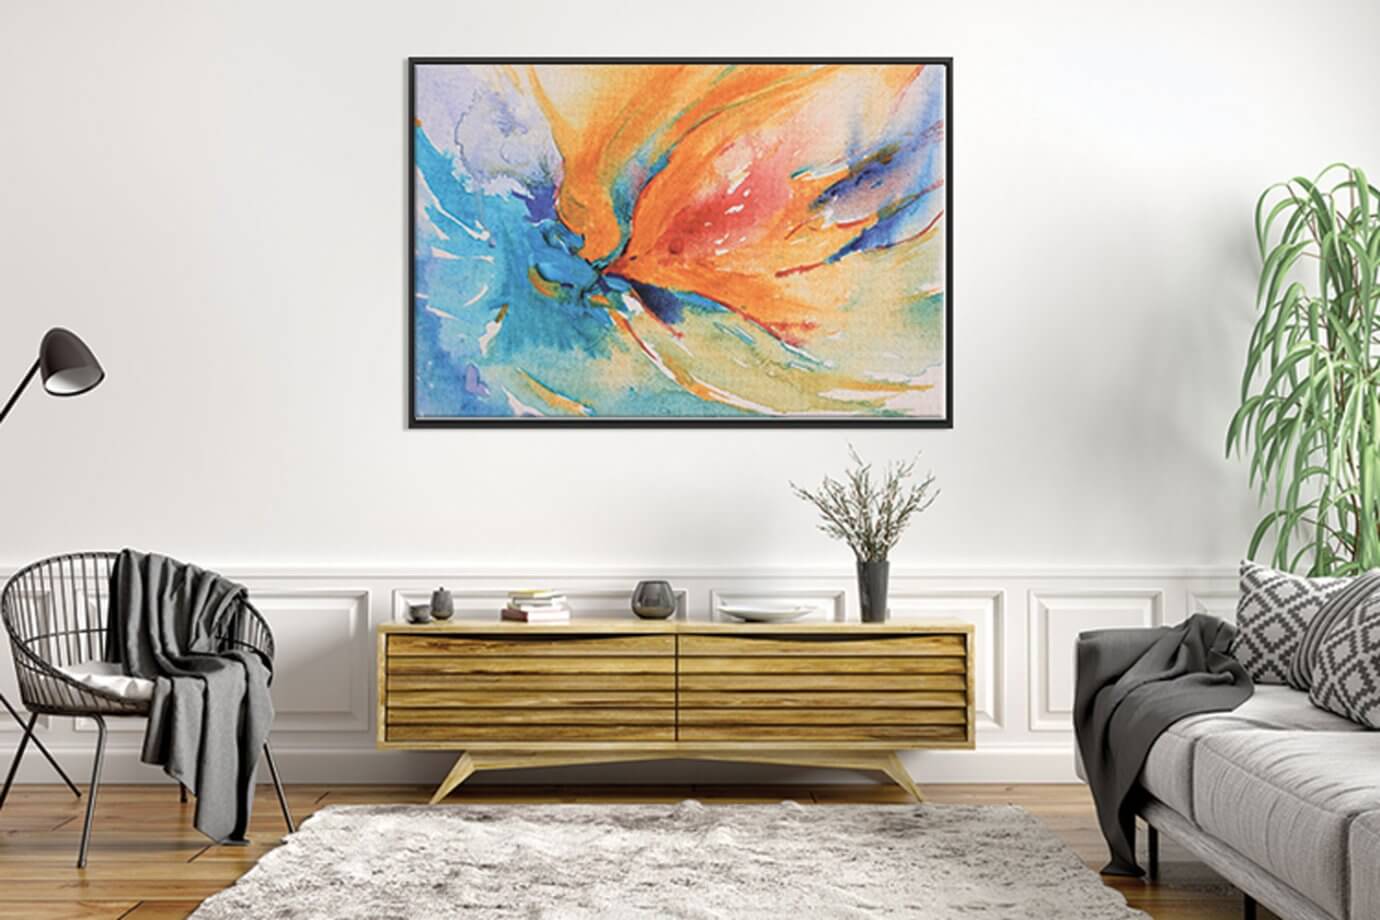 Colorful abstract art in living room.